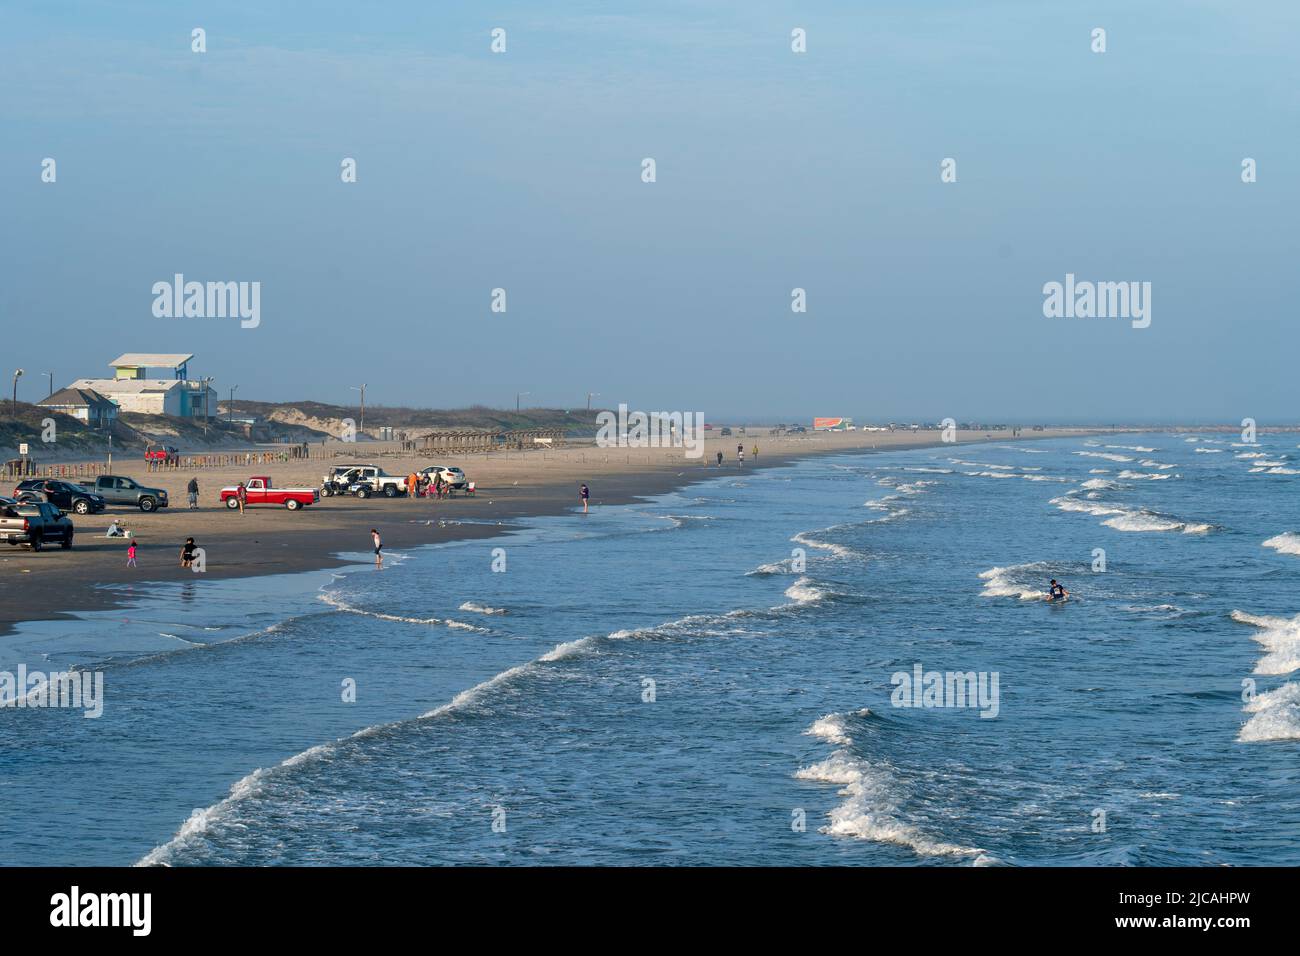 PORT ARANSAS, TX - 17 FEB 2020: Families and tourists enjoying the beach on a hazy evening at the Gulf of Mexico in Texas. Cars and pickup trucks are Stock Photo